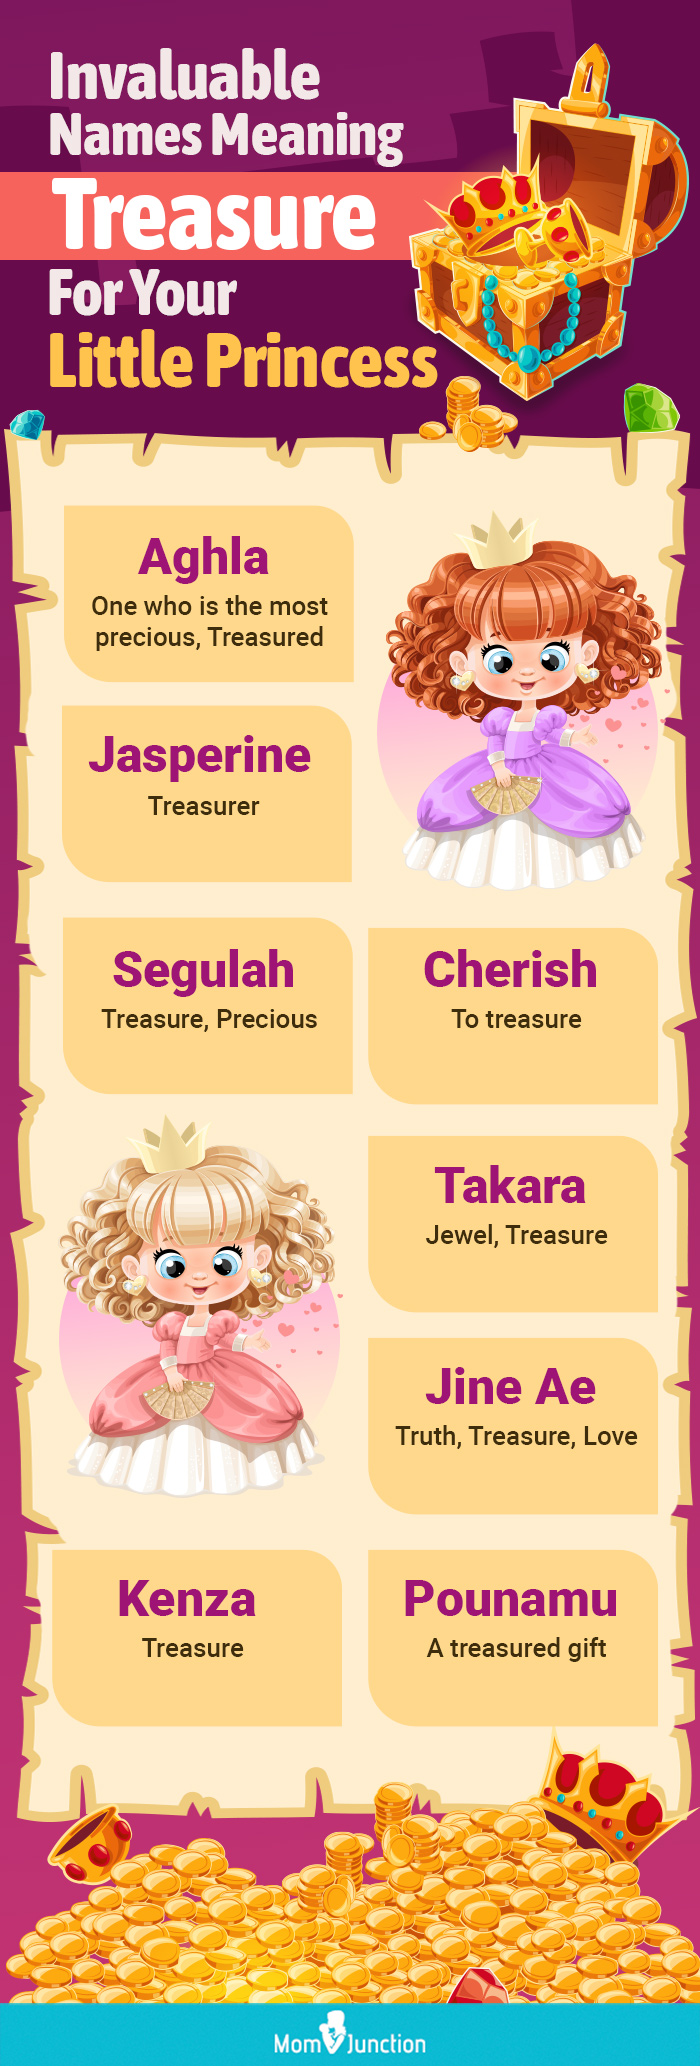 valuable names meaning treasure for your little princess (infographic)